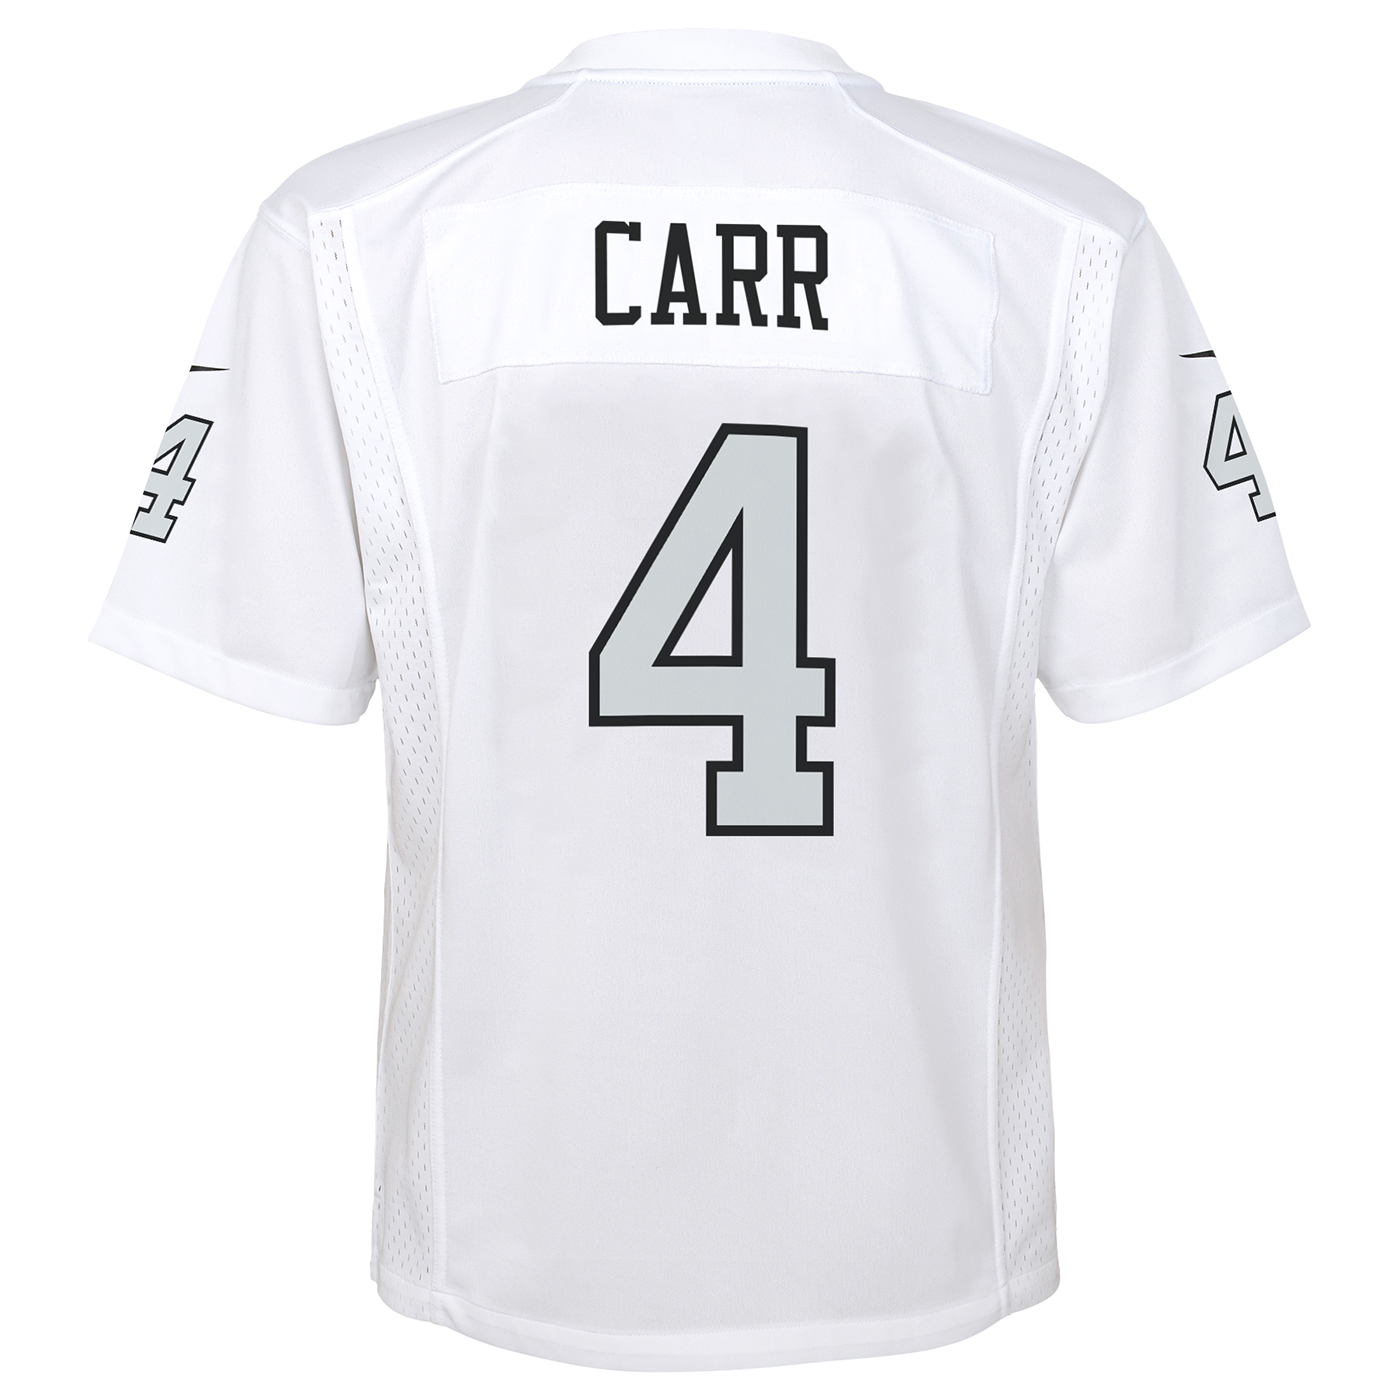 carr color rush jersey